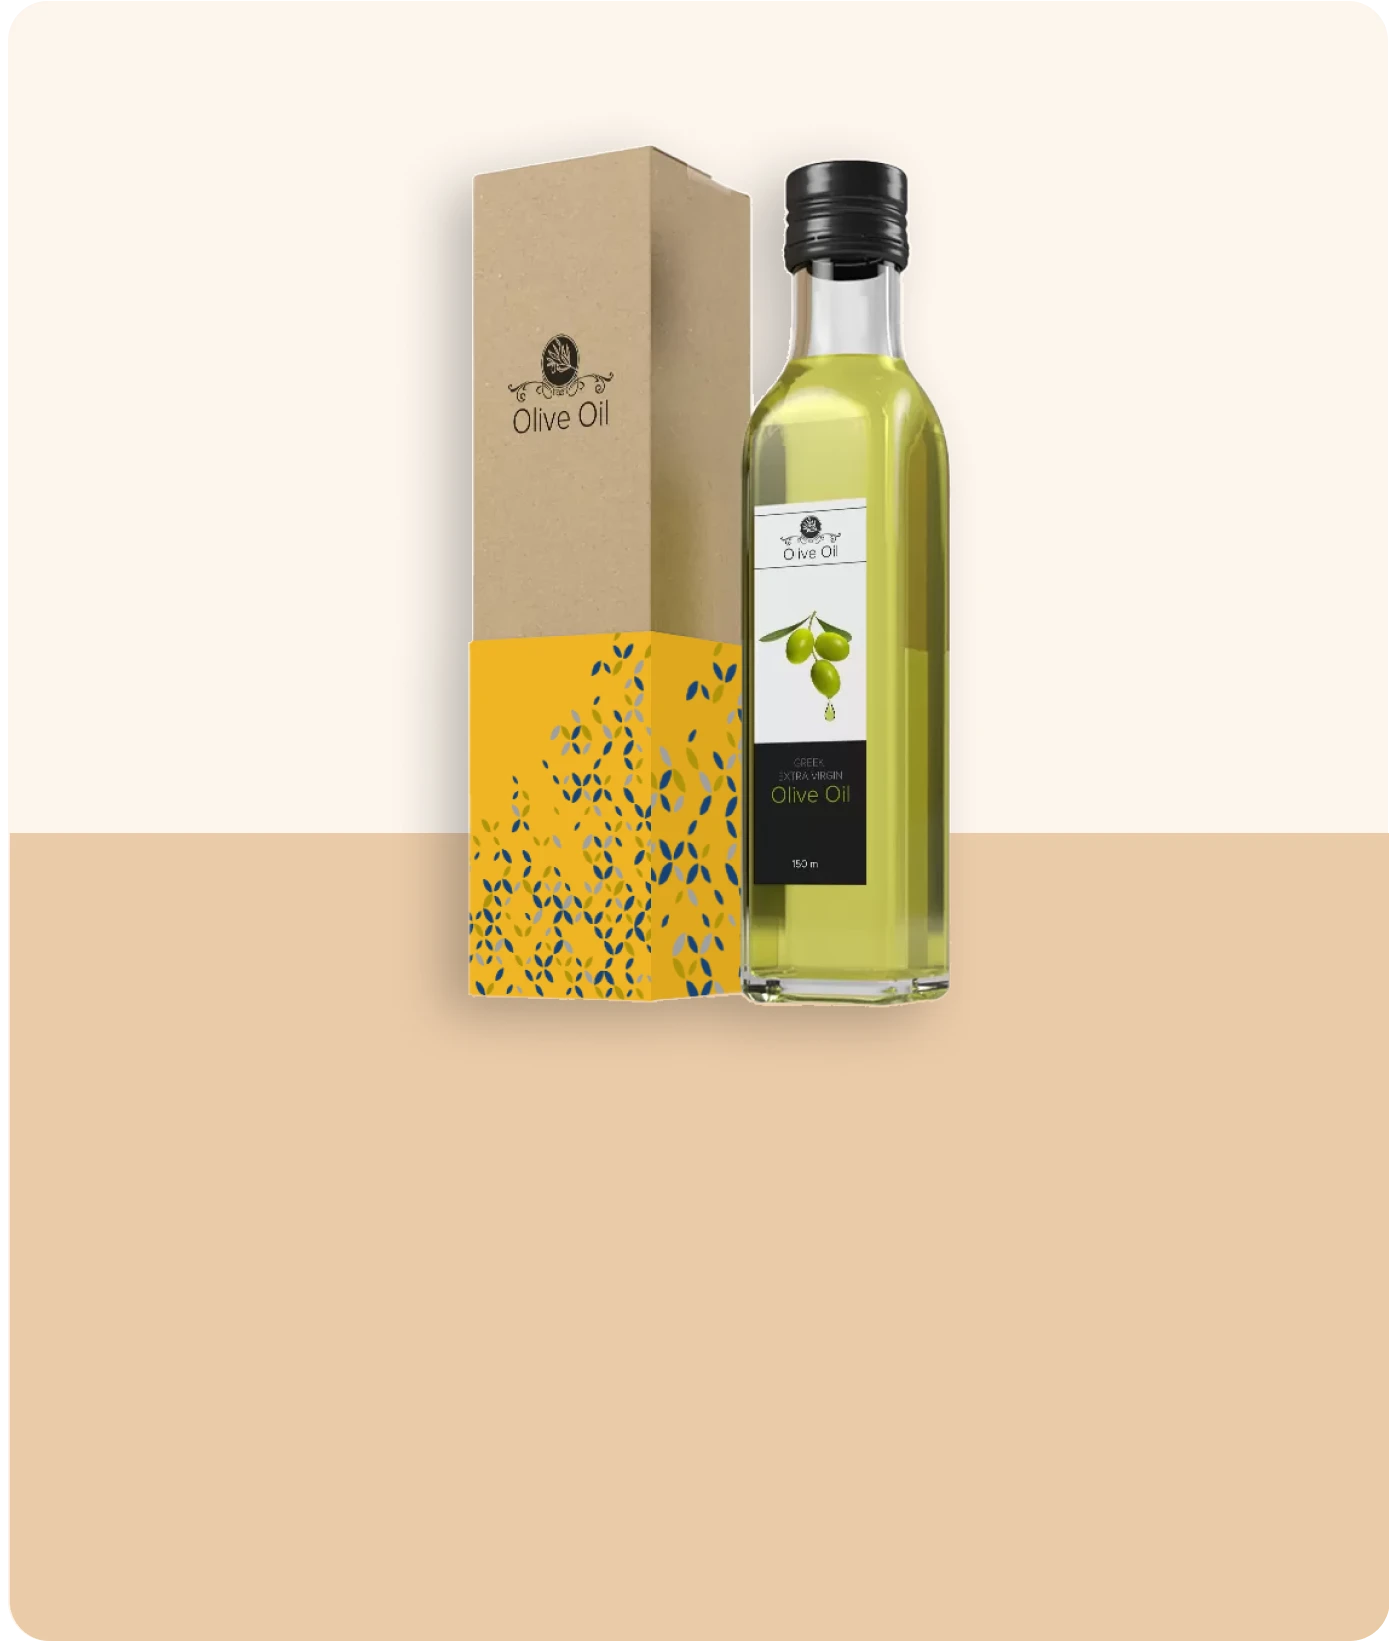 Olive Oil Boxes related product image | The Box Lane